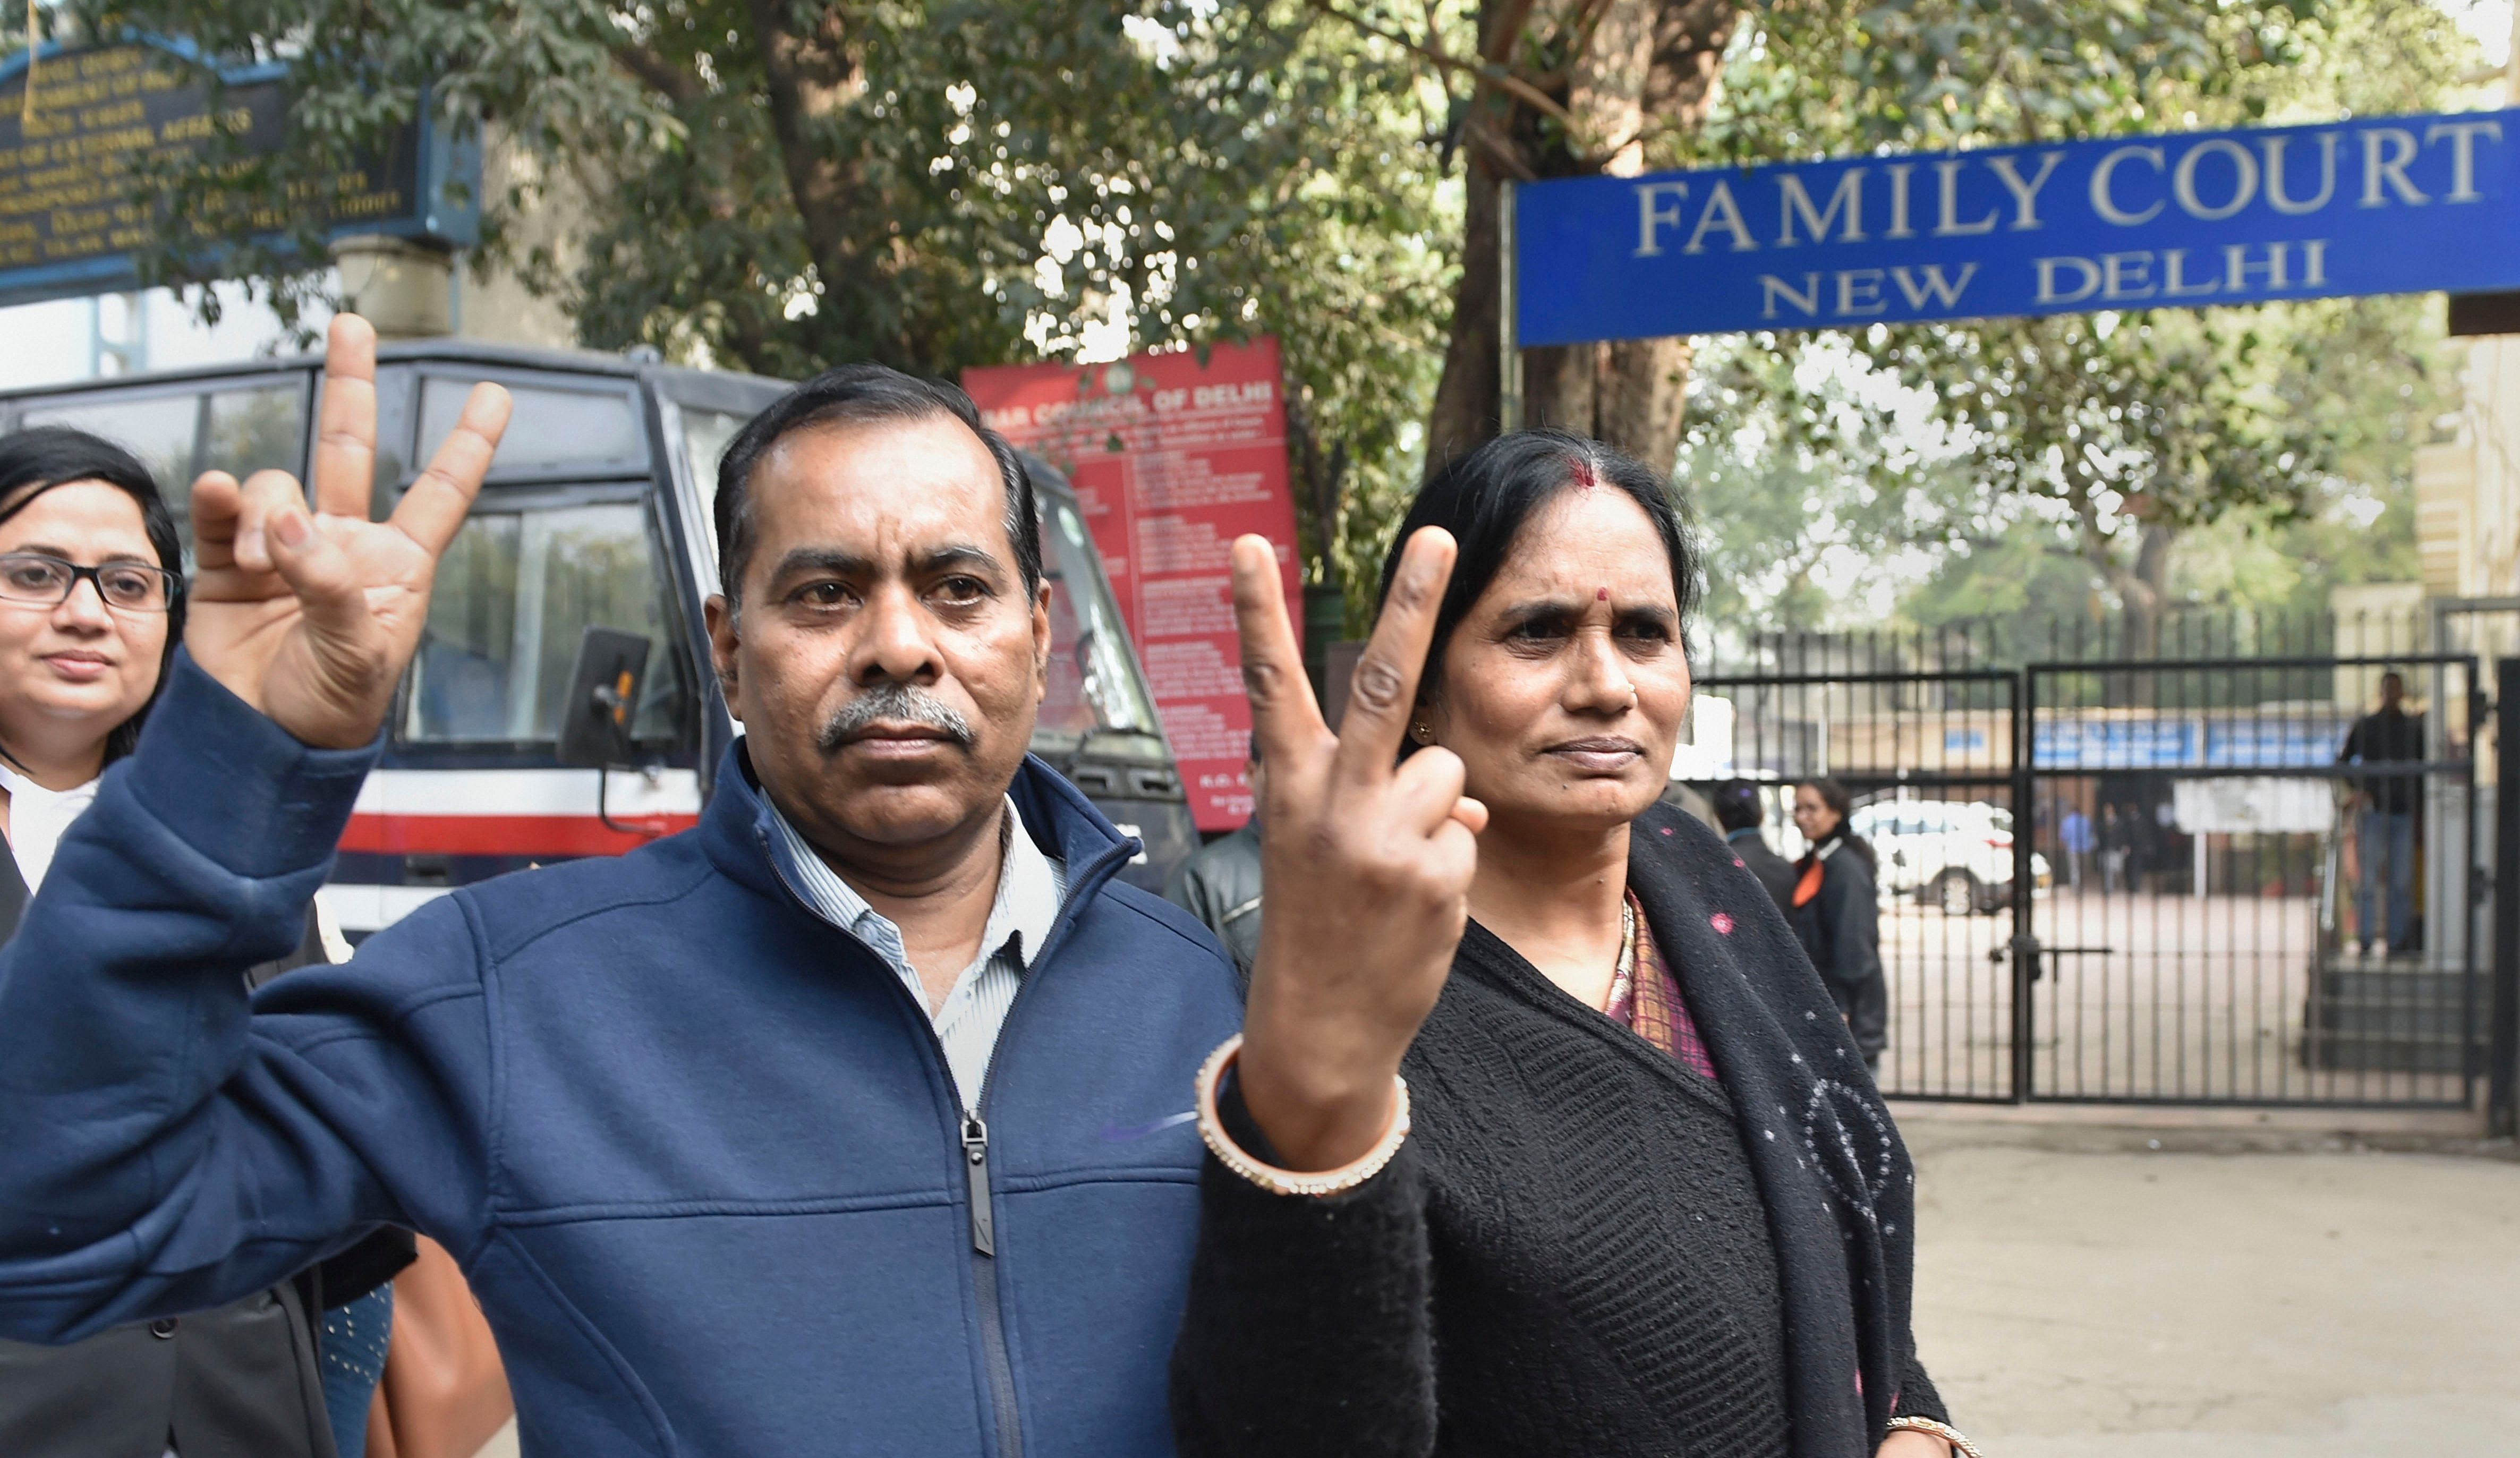 Nirbhaya rape case victim's parents show the victory sign as they arrive at the Patiala House Court, in New Delhi. (PTI Photo)